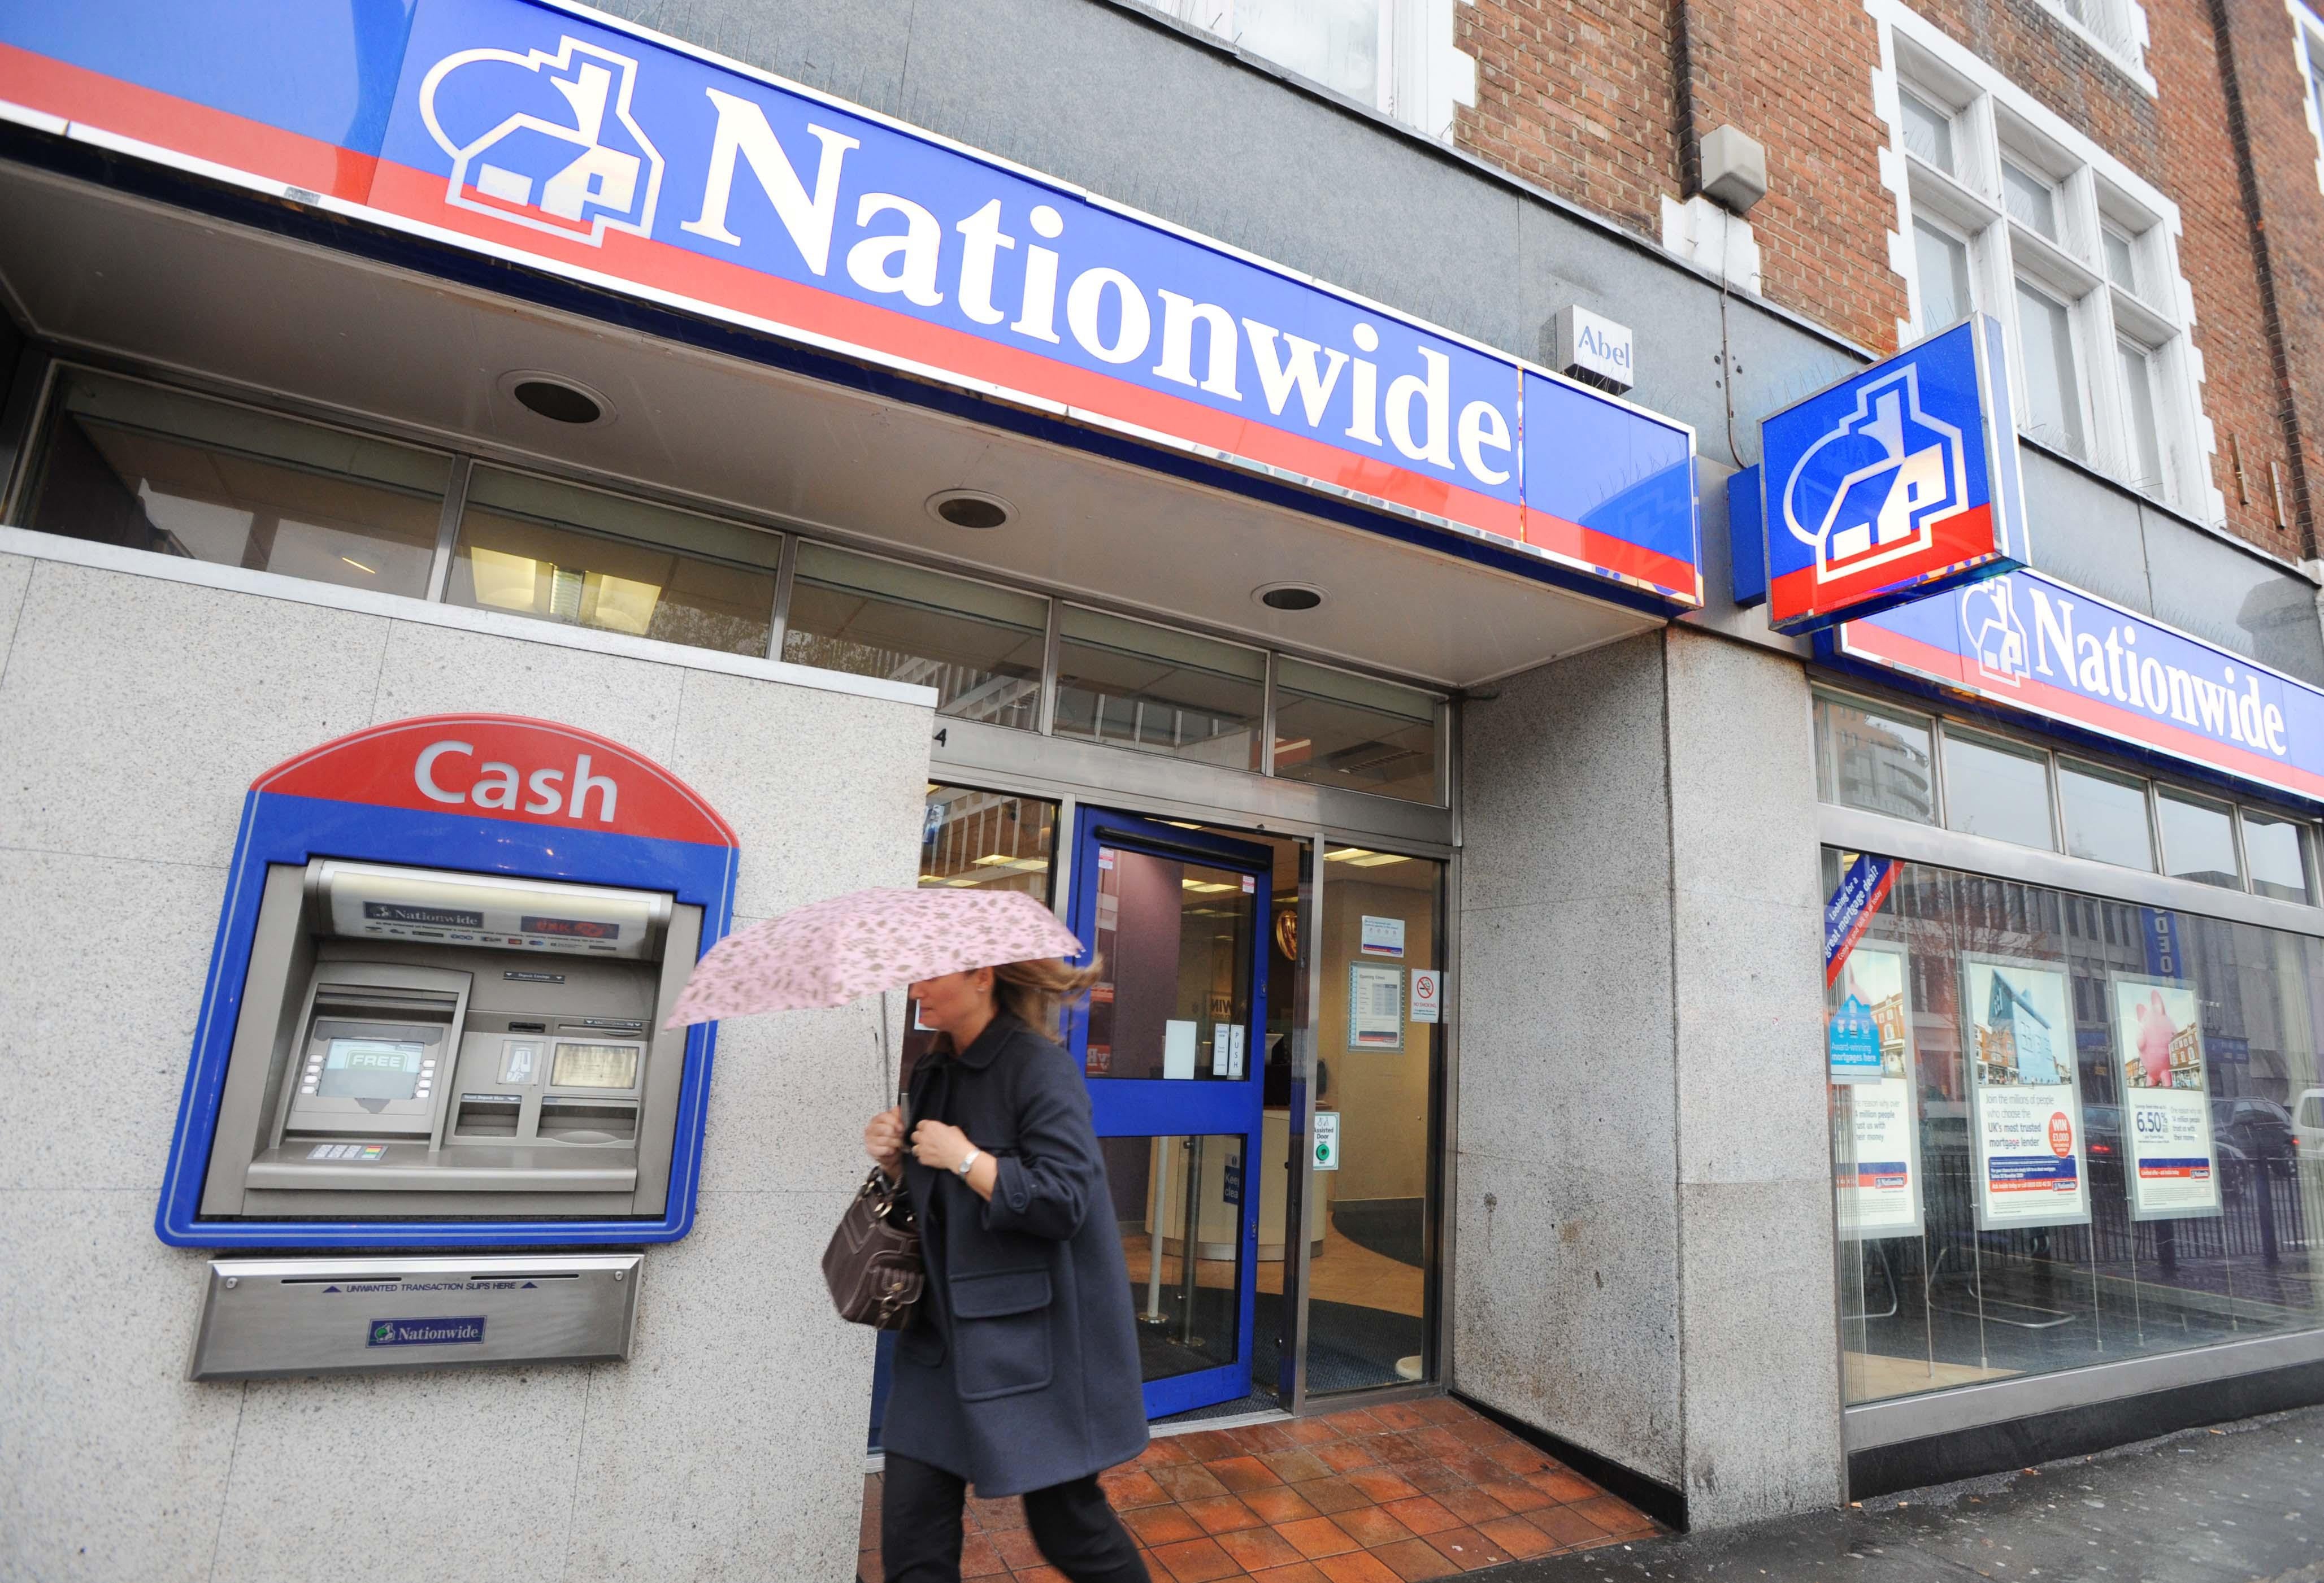 Nationwide Building Society has extended its pledge to protect branches in cities and towns across the UK (PA)